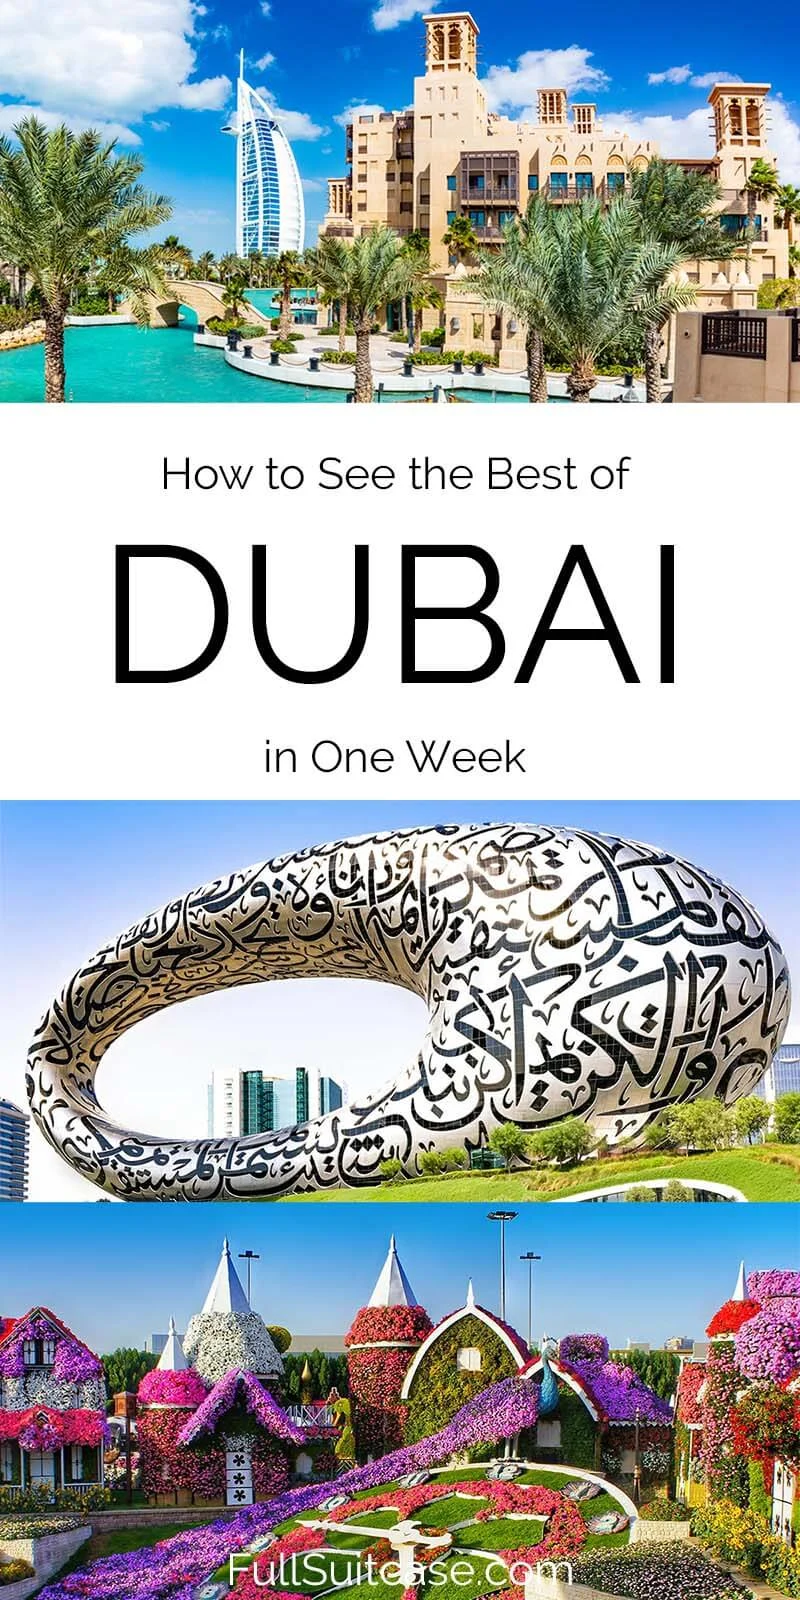 How to see the best of Dubai in one week - Dubai itinerary and top places to visit